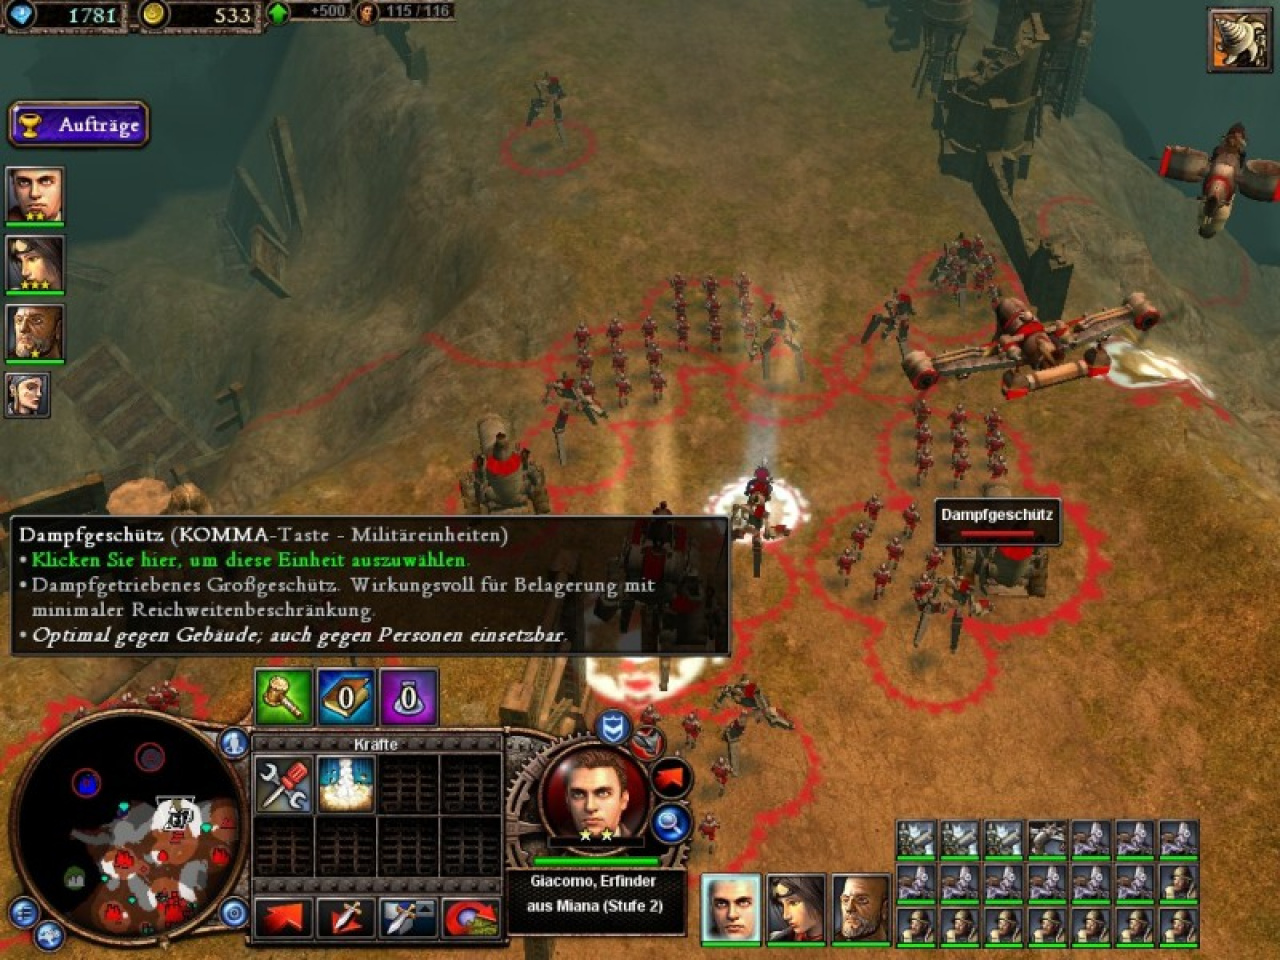 Rise of Nations: Rise of Legends Cheats and Hints for PC